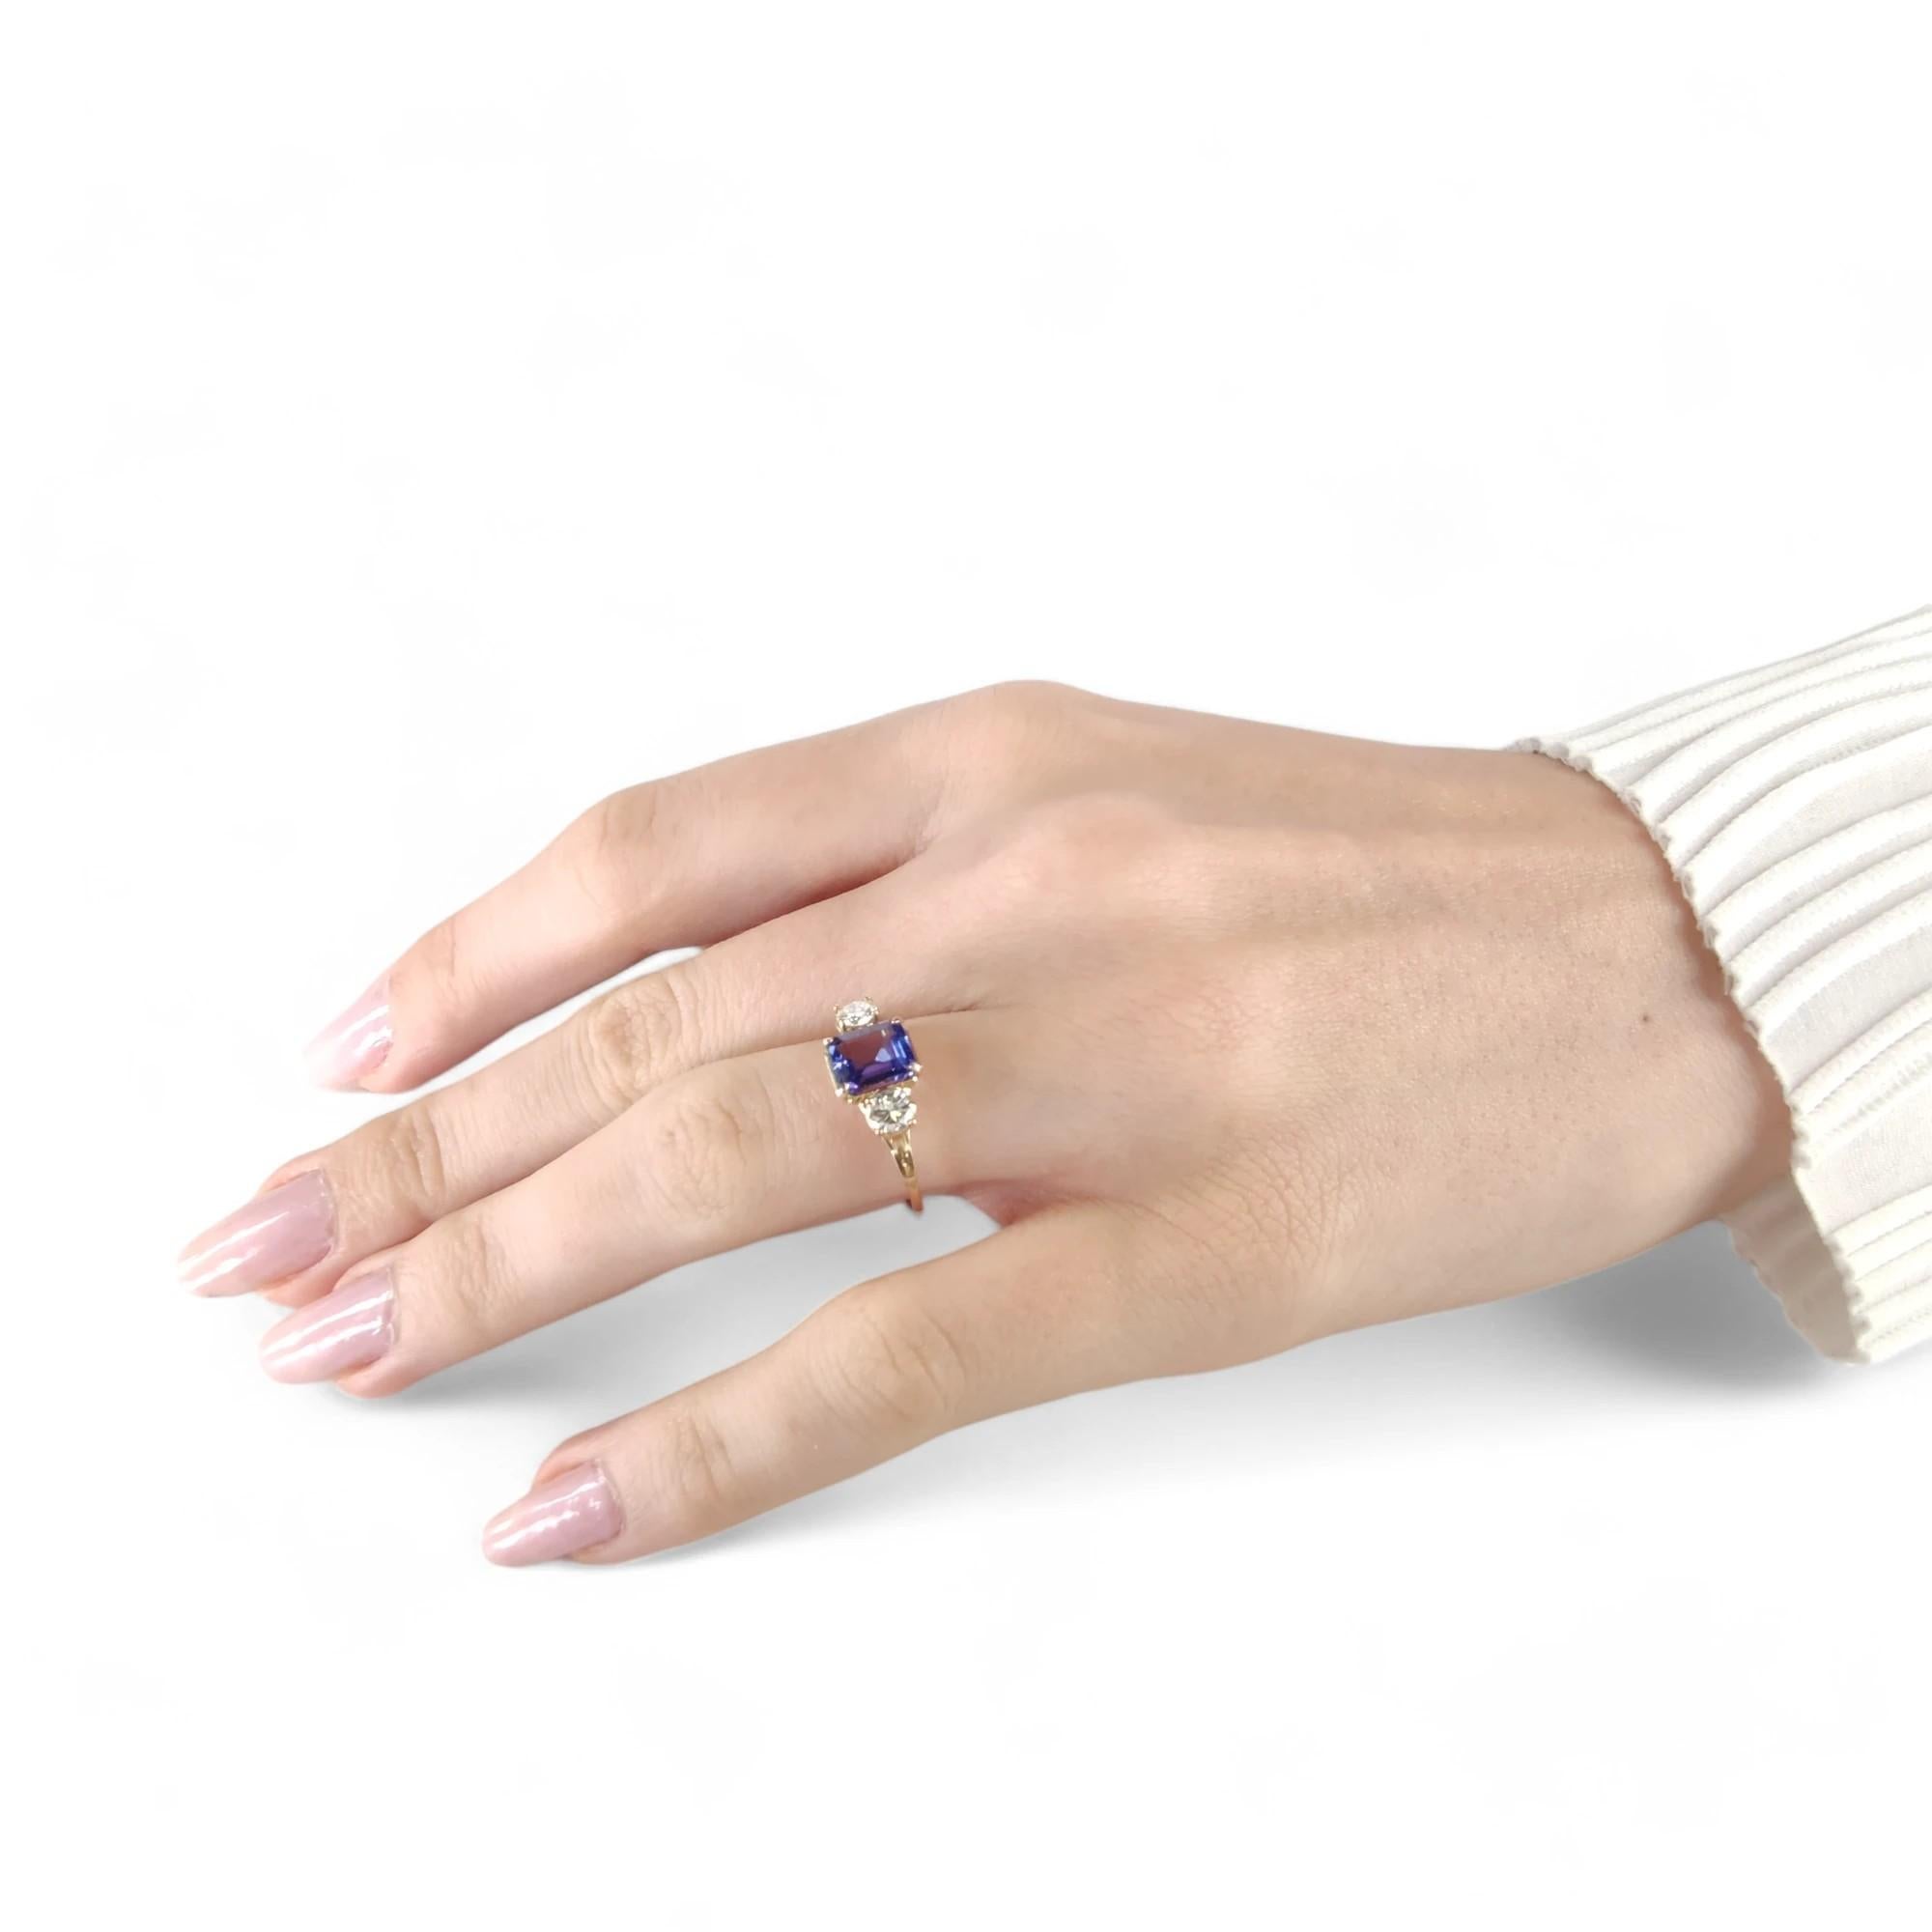 Exquisite Tanzanite Women's Ring - 14k Gold, Emerald-Cut Tanzanite, Adorned with Diamonds. A unique violet-blue gemstone for a timeless and elegant Tanzanite engagement. Handcrafted and ideal for a special gift. Elevate your style with this